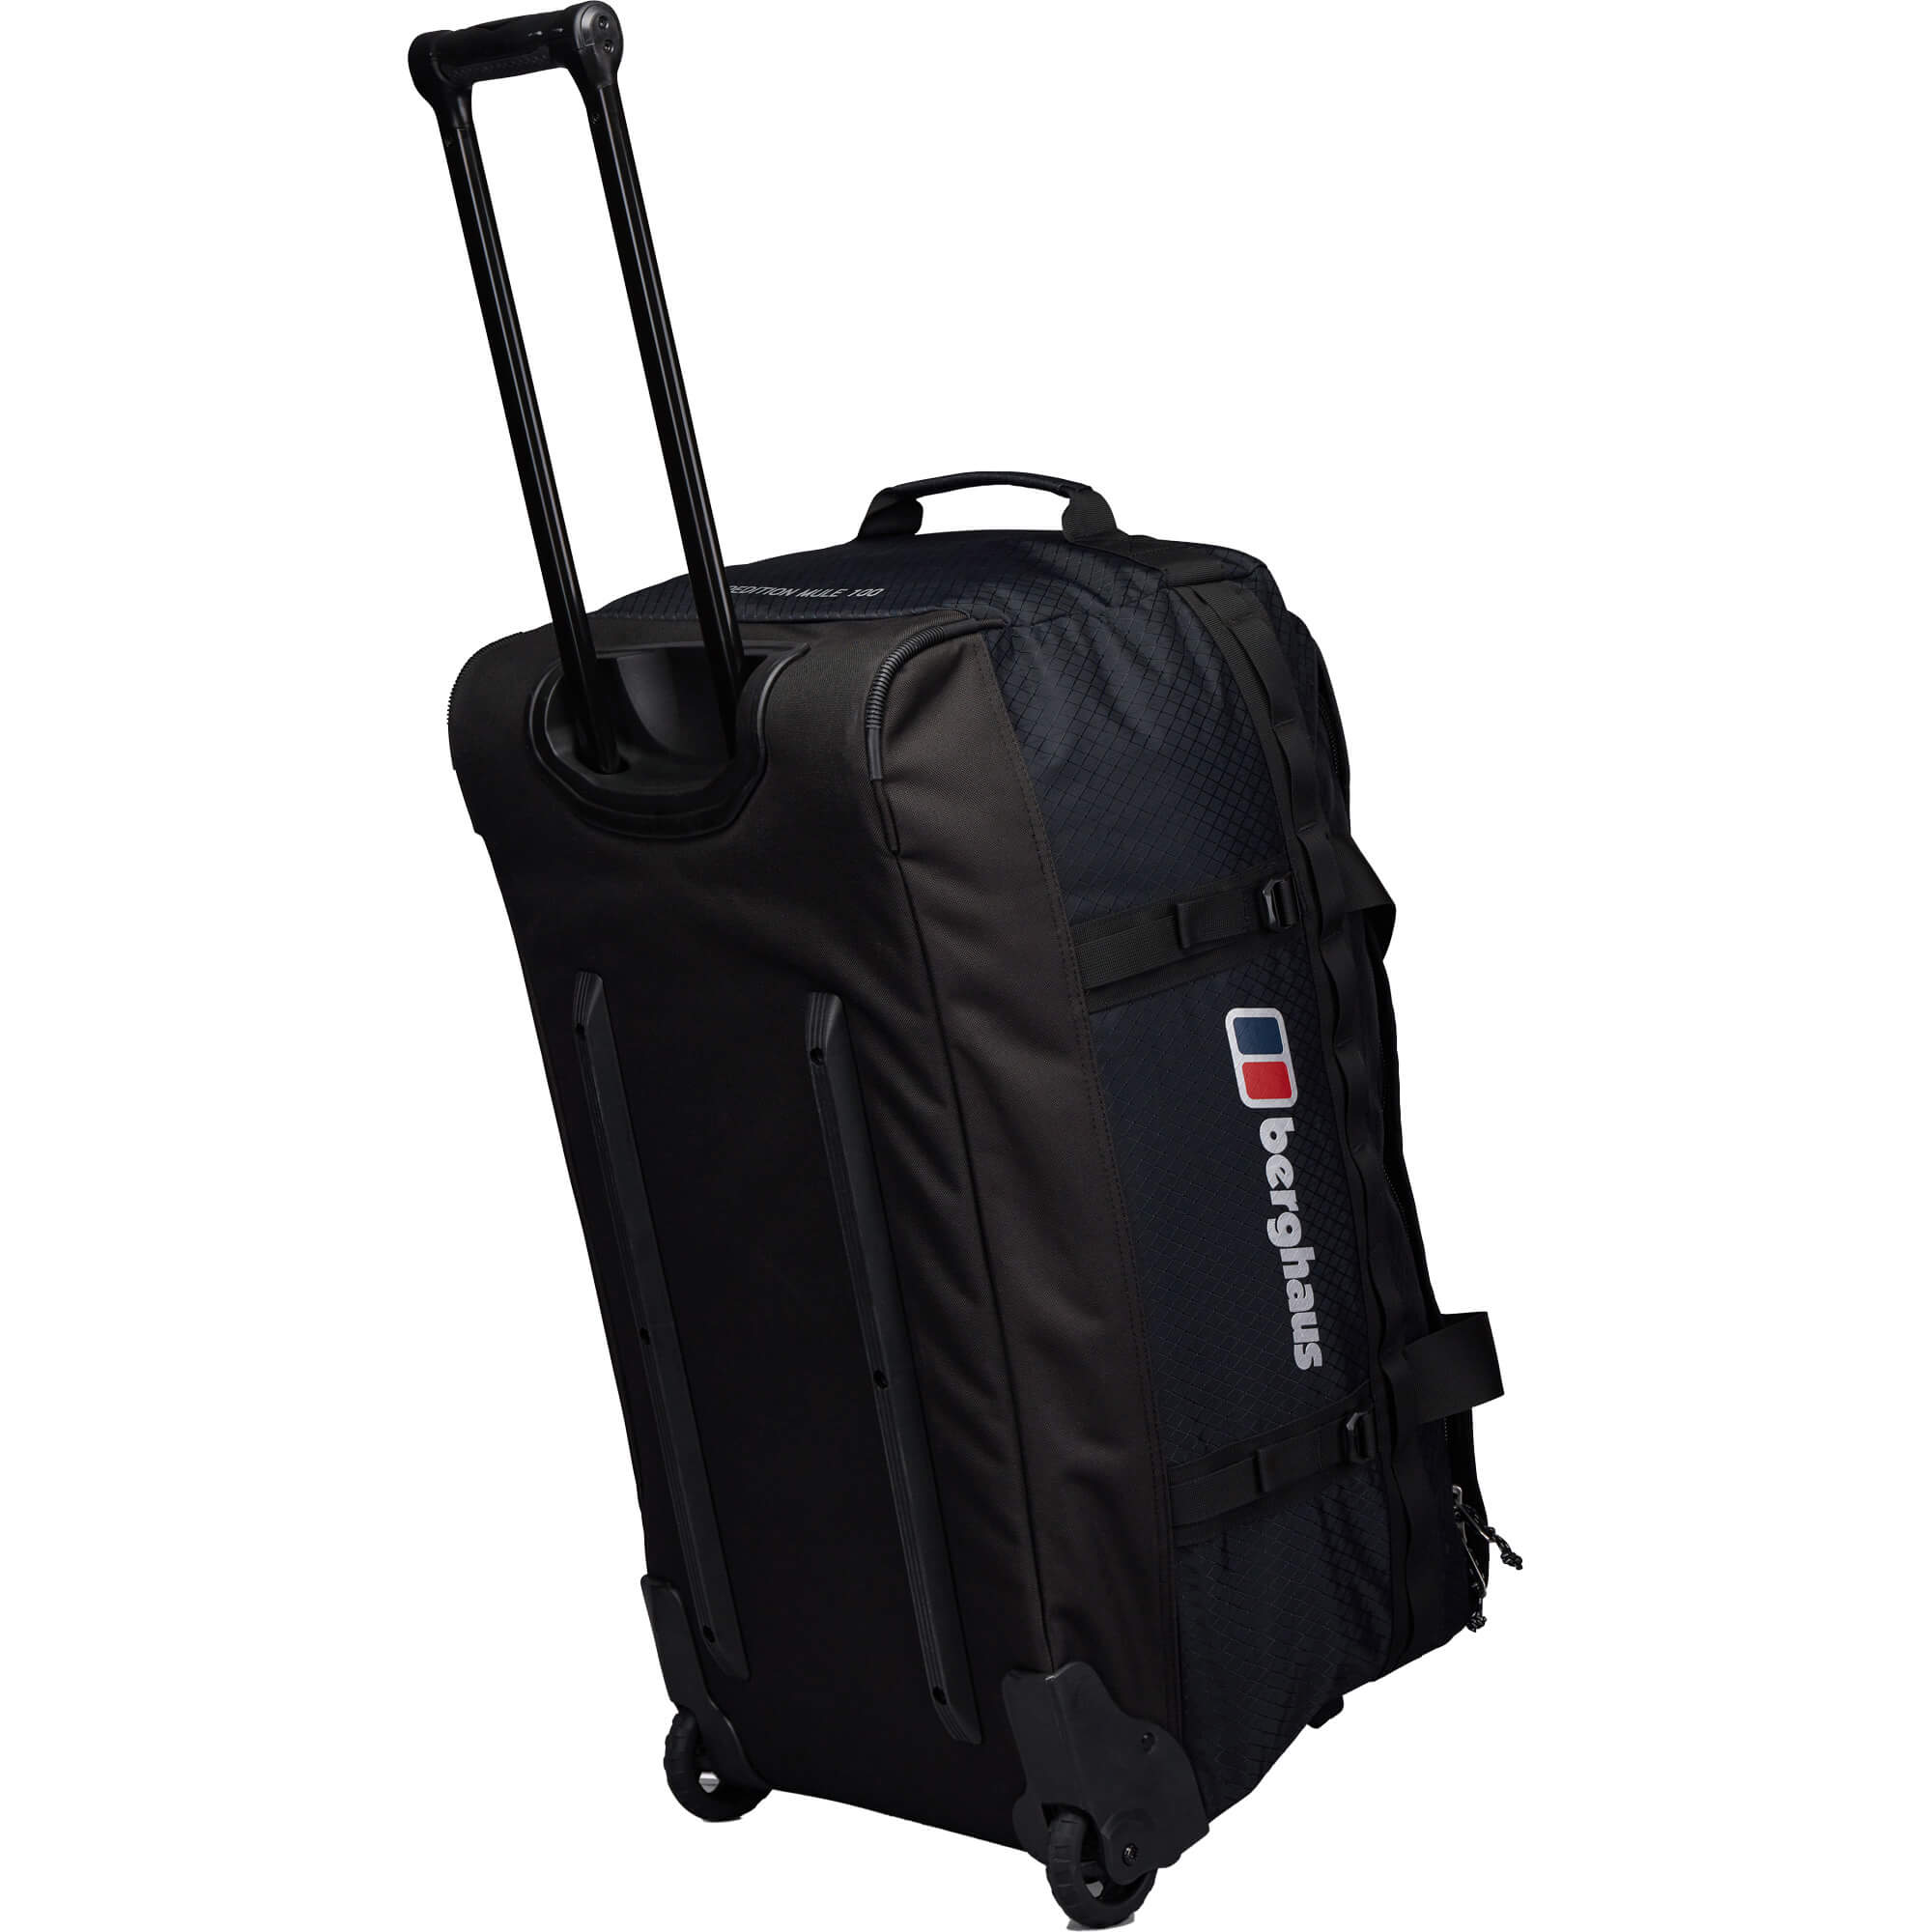 Berghaus Expedition Mule Wheeled Holdall